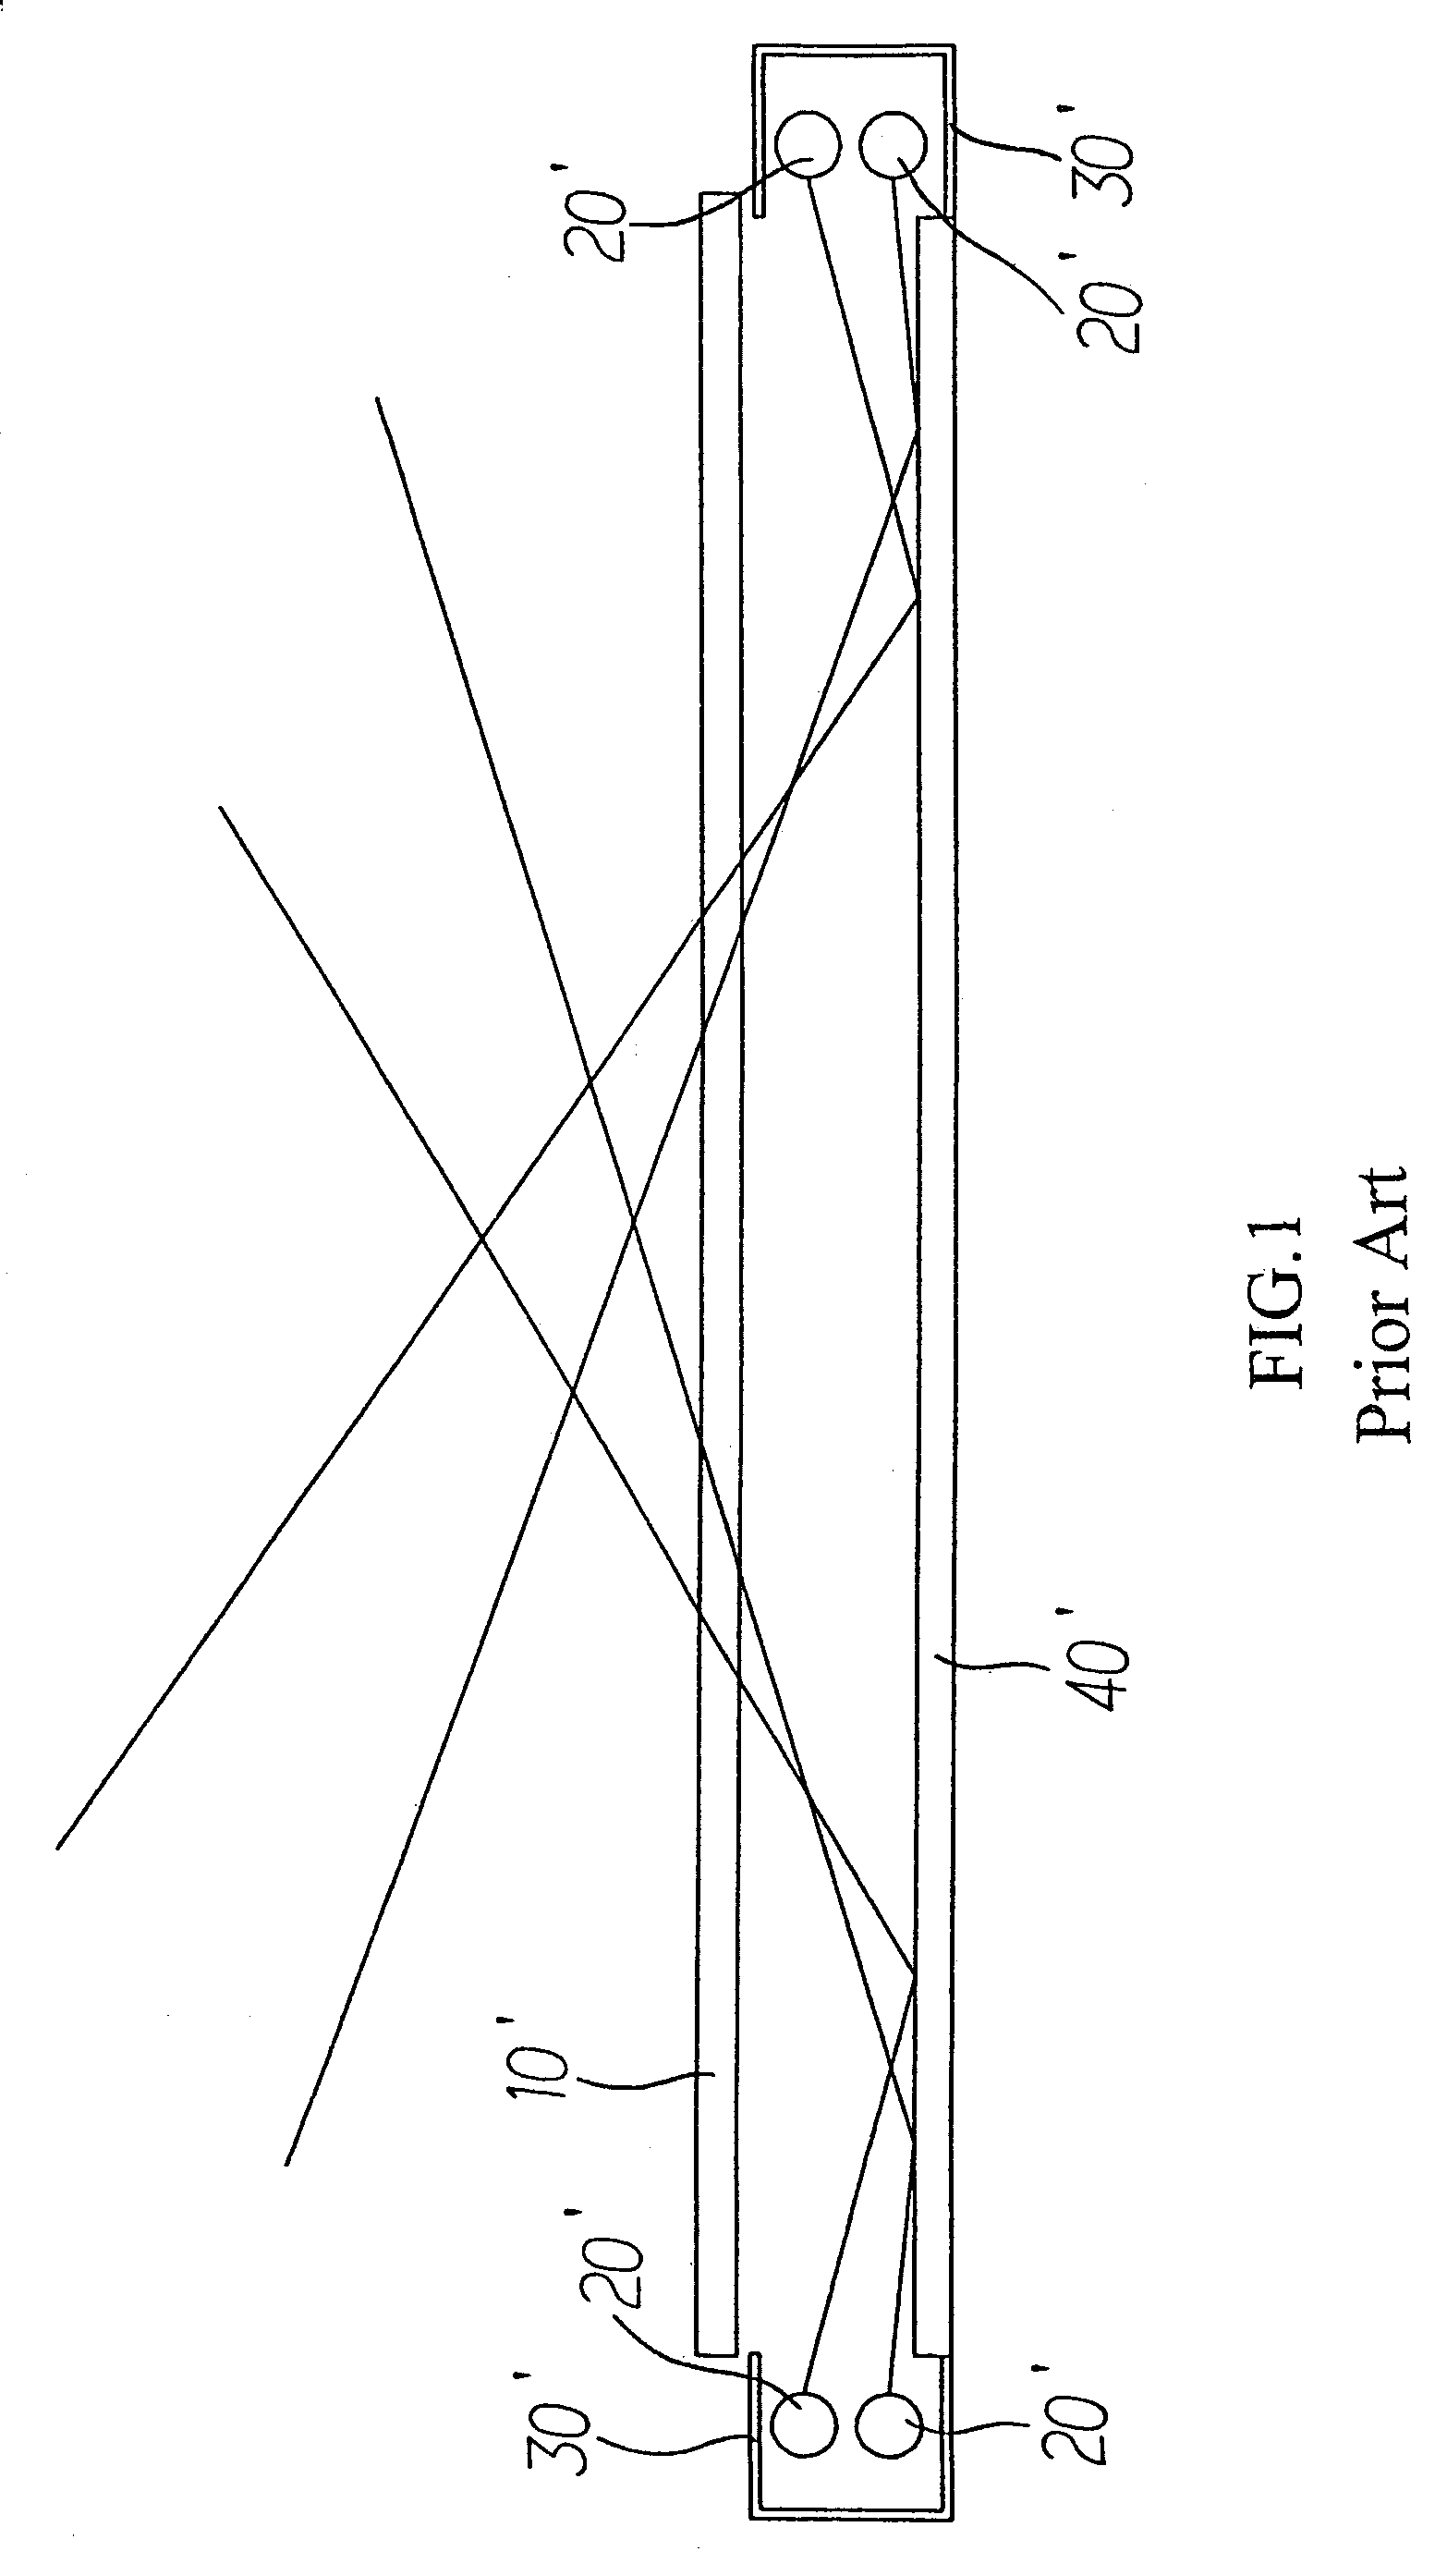 Light equalizing structure of backlight modules